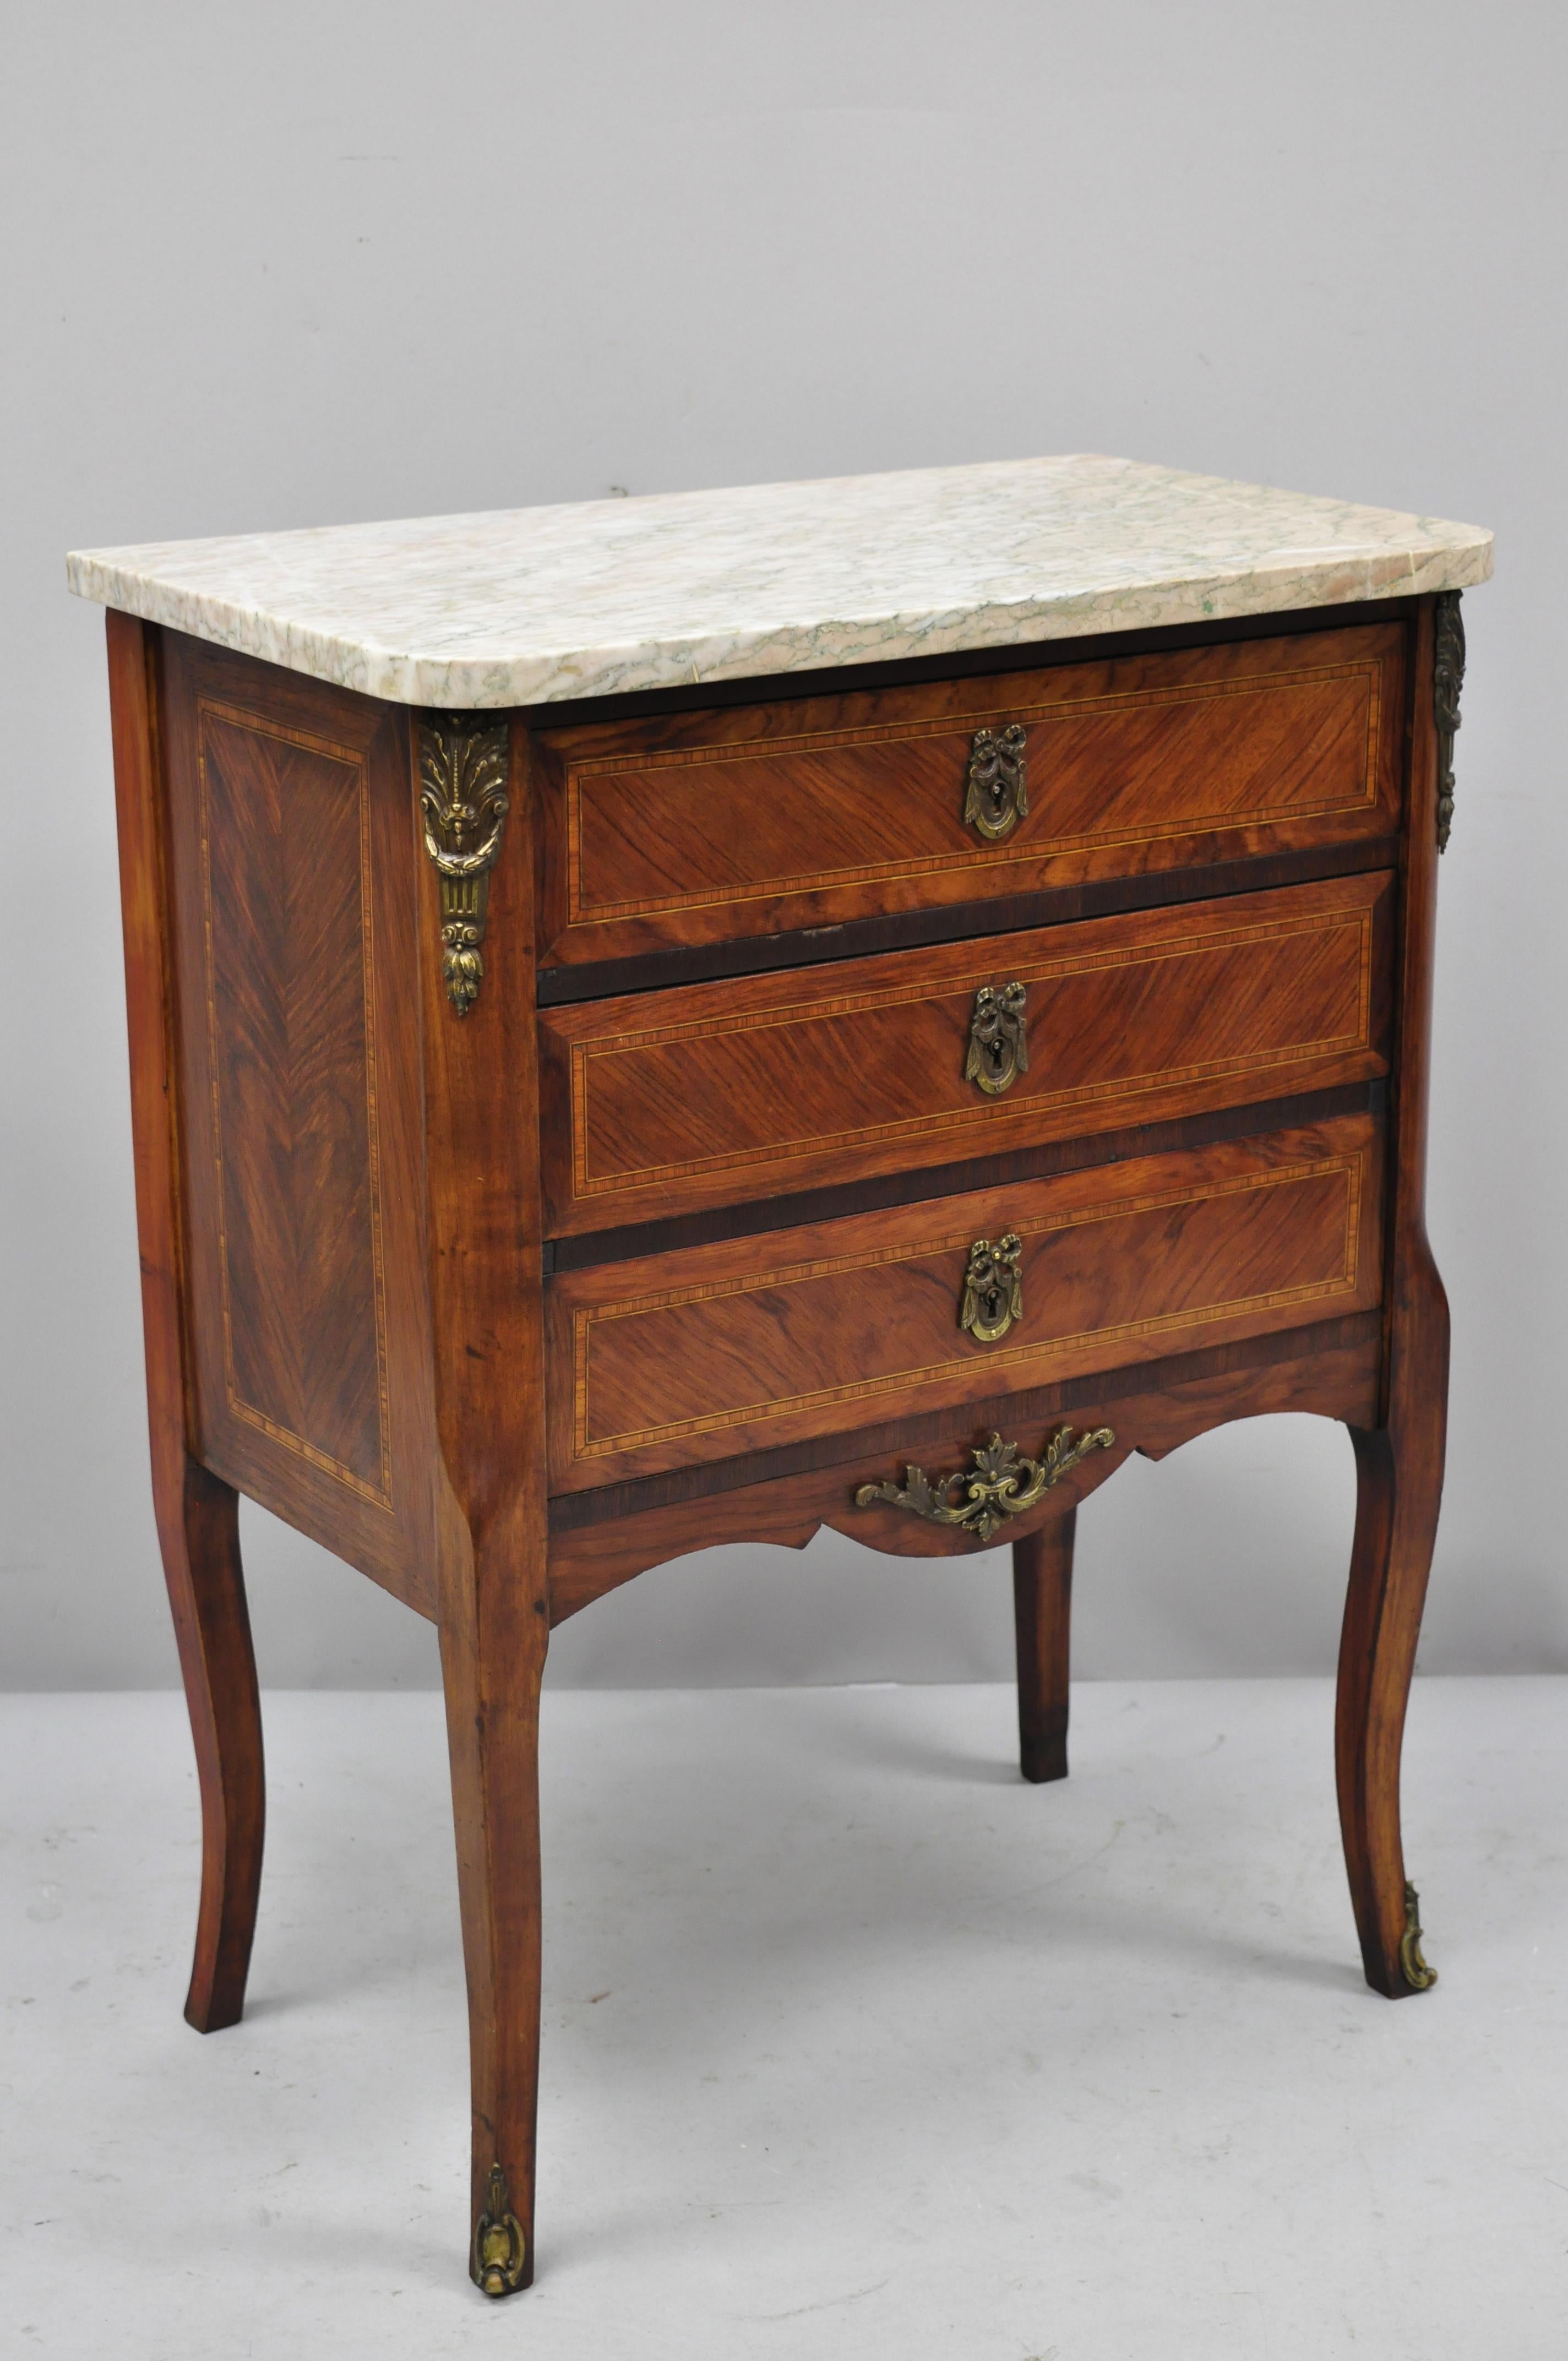 Early 20th century French Louis XV marble-top nightstand with bronze ormolu. Item features marble top, kingwood inlay, bronze ormolu, beautiful wood grain, no key, but unlocked, 3 dovetailed drawers, cabriole legs, very nice antique item, great